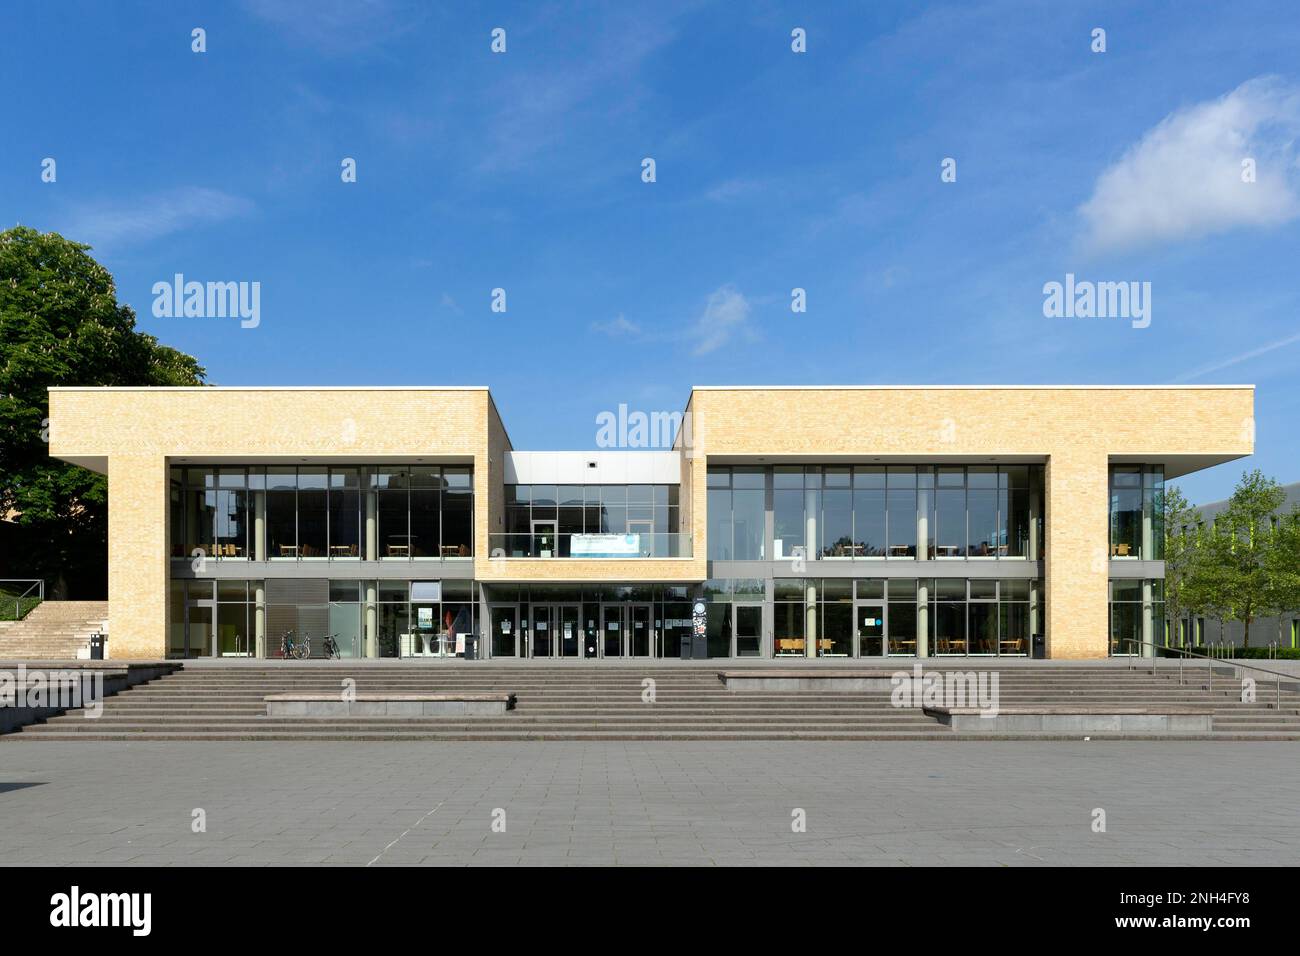 University of Osnabrueck, Campus Westerberg, Mensa and Cafeteria, Osnabrueck, Lower Saxony, Germany Stock Photo